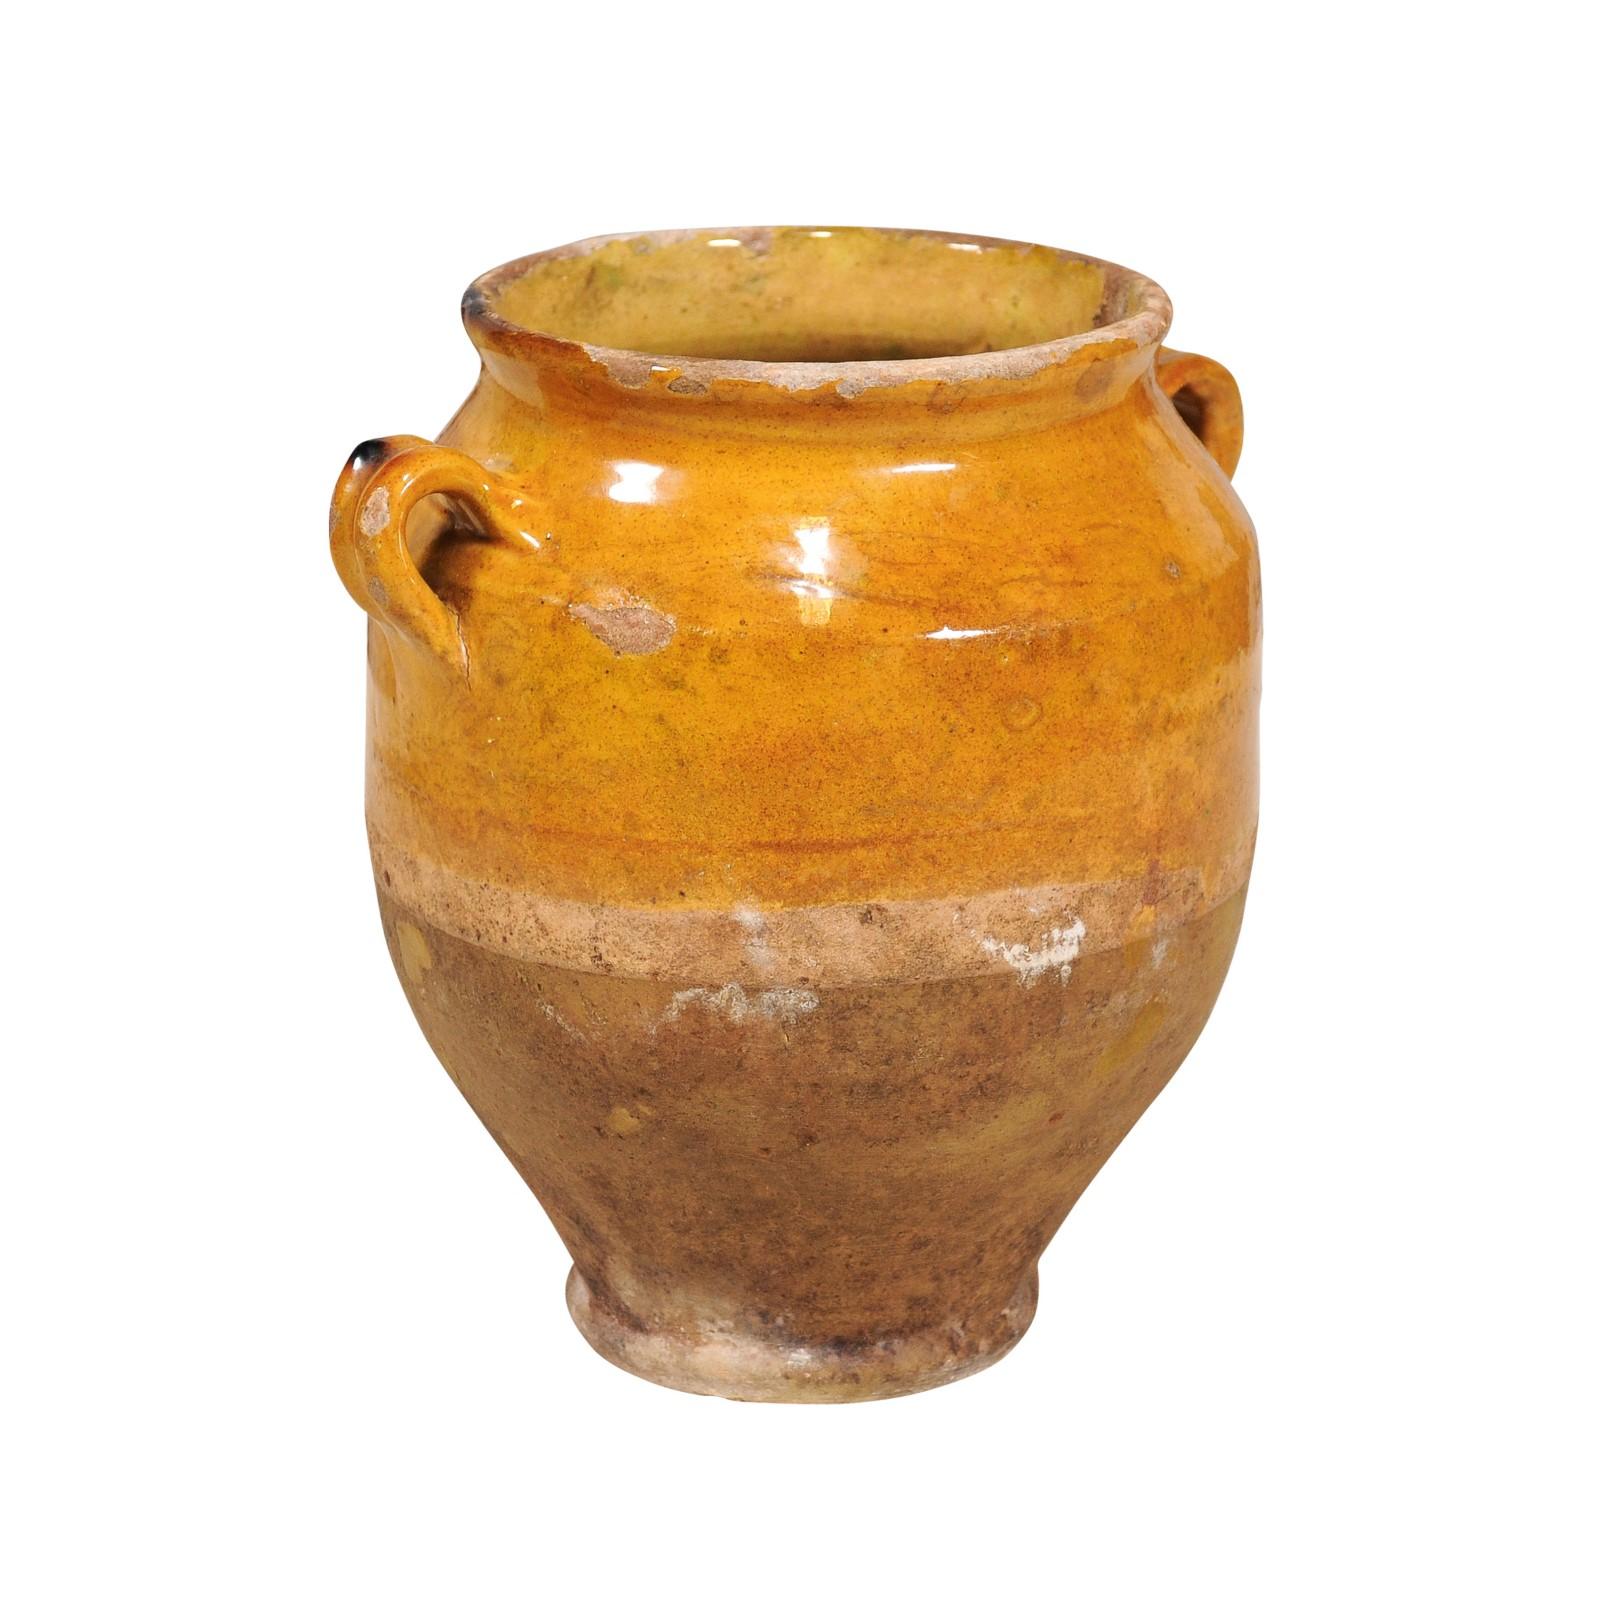 A French Provincial pot à confit pottery from the 19th century with yellow glaze and two handles. Immerse yourself in the rustic charm and warmth of this French Provincial pot à confit from the 19th century, a piece that embodies the essence of